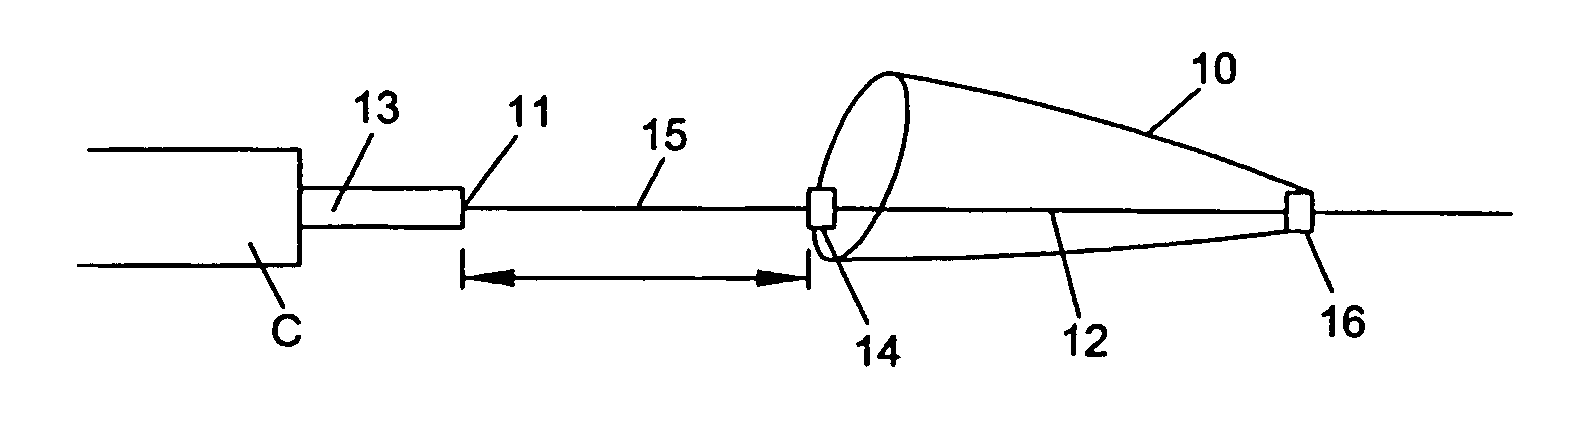 Distal protection devices having controllable wire motion